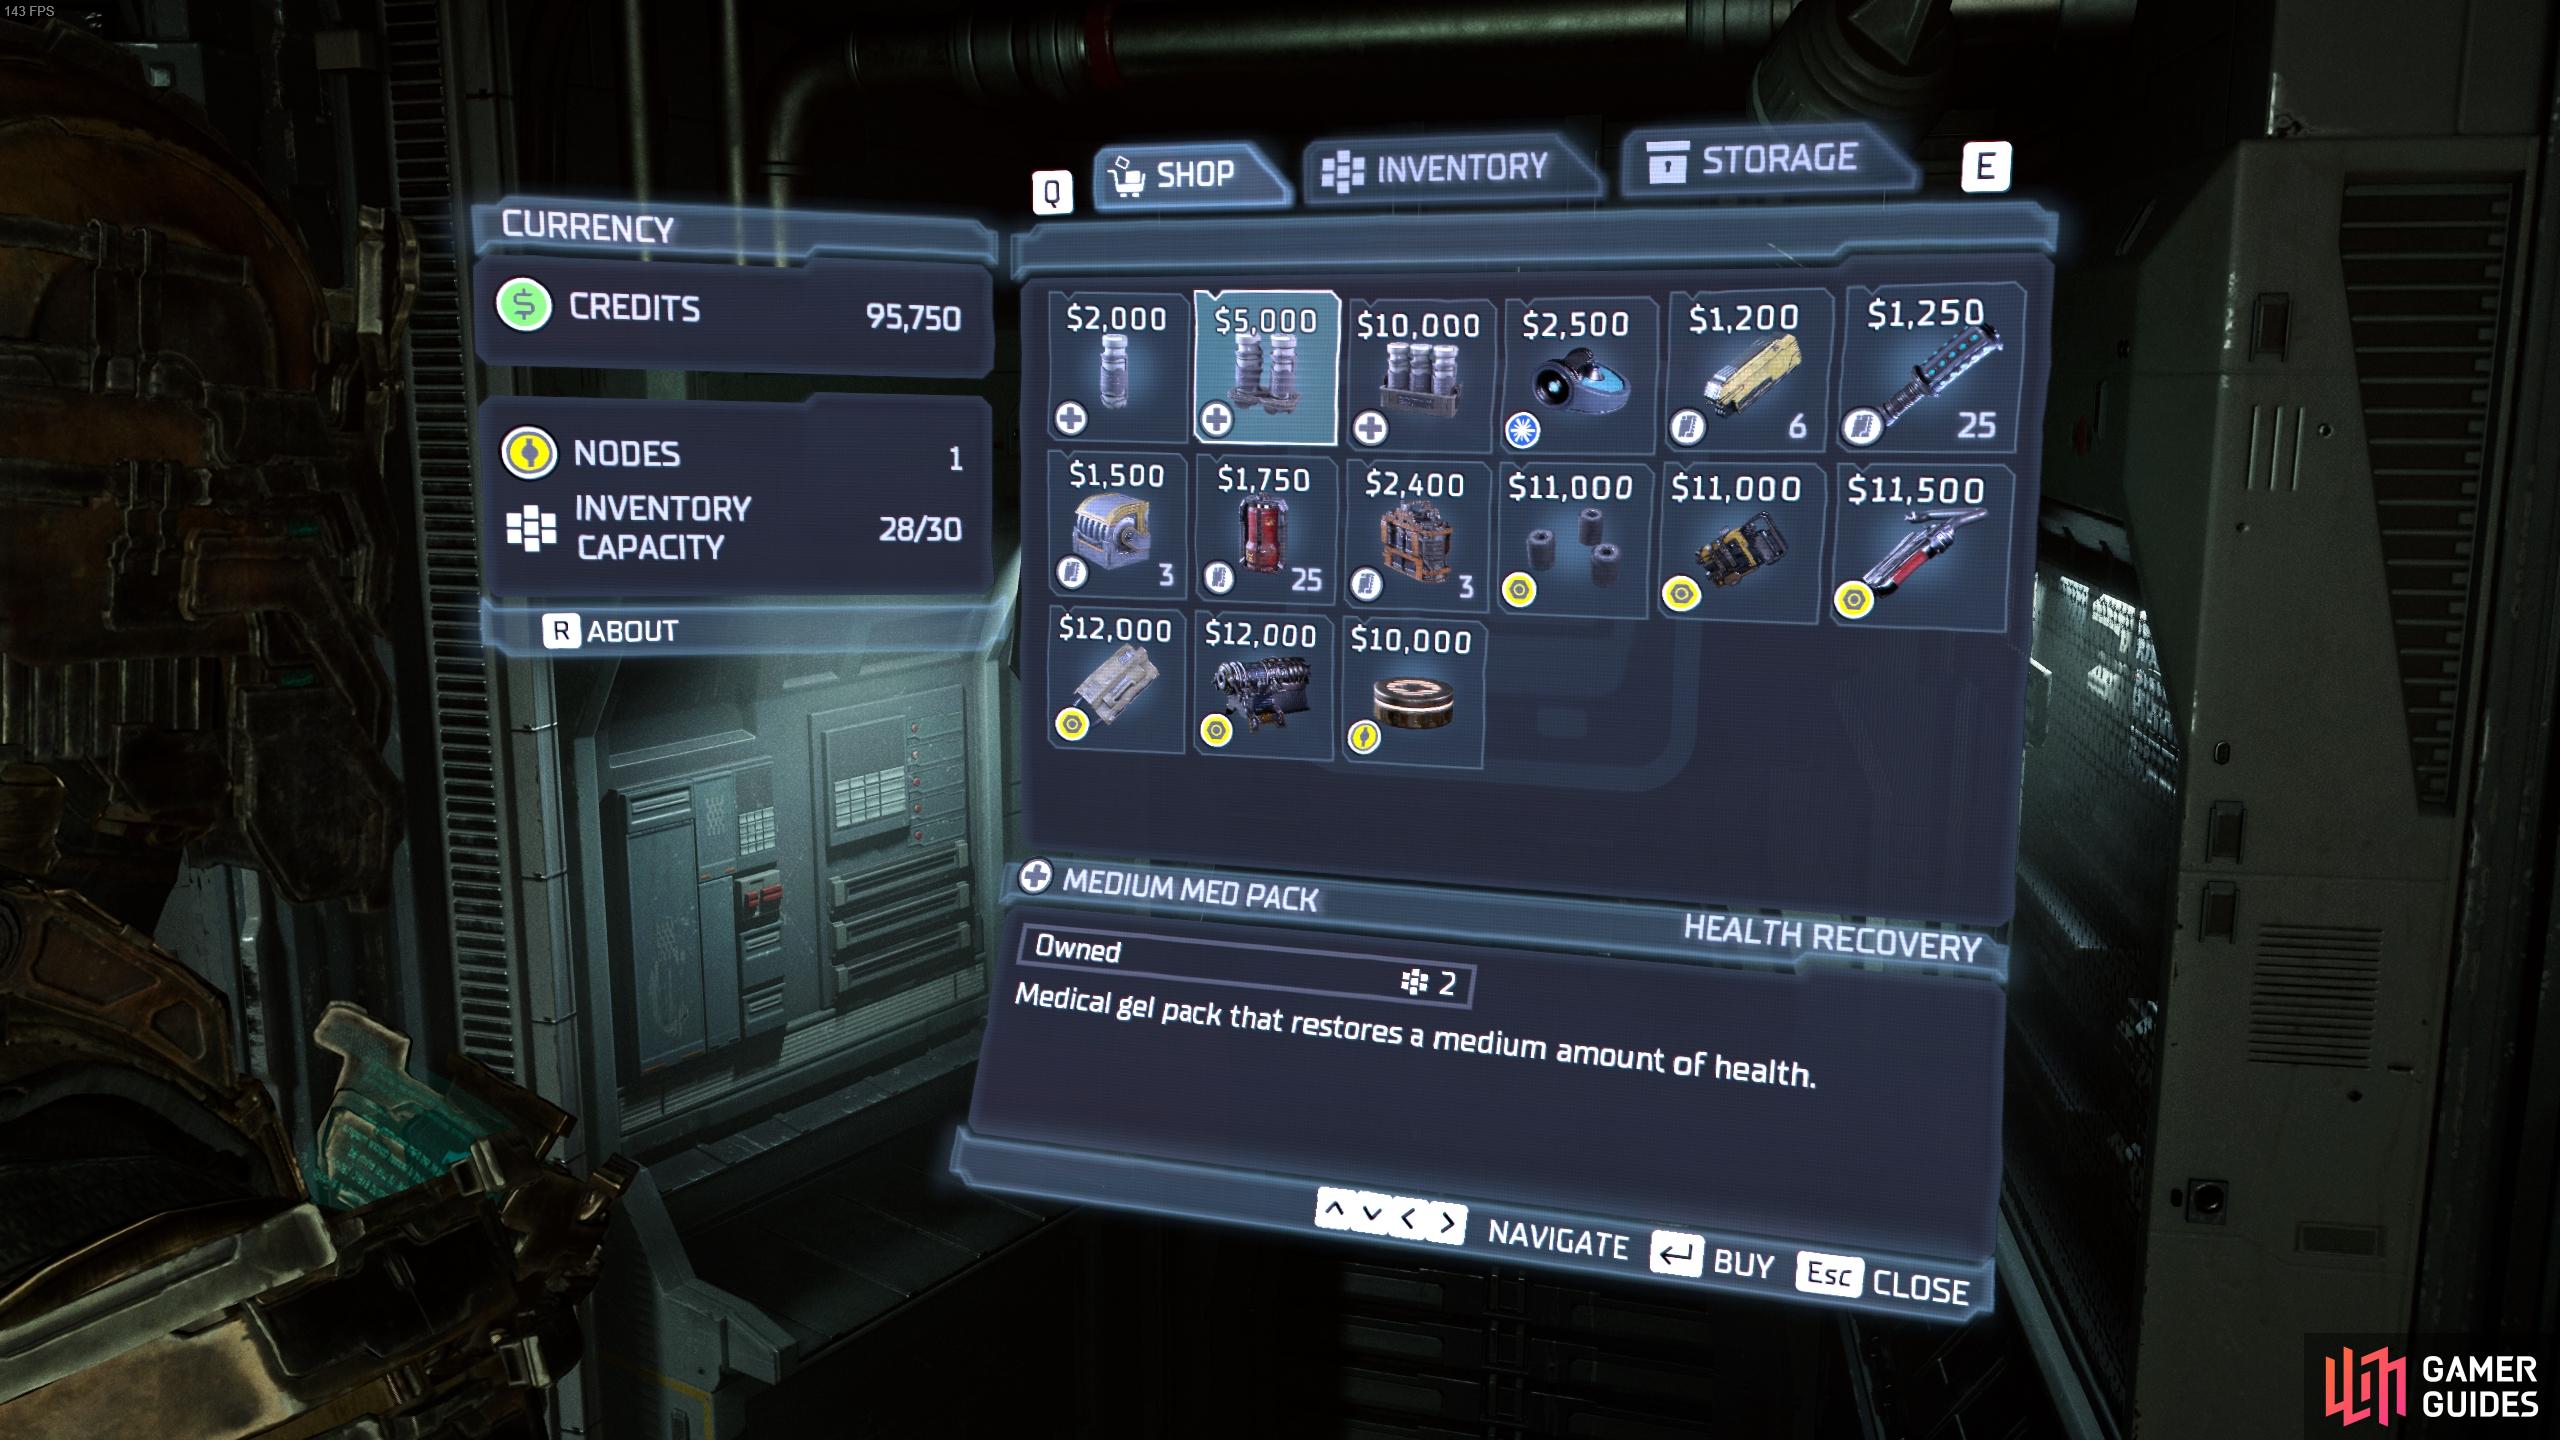 You can purchase Medium Med Packs for 5,000 credits from any store once you have the schematic.